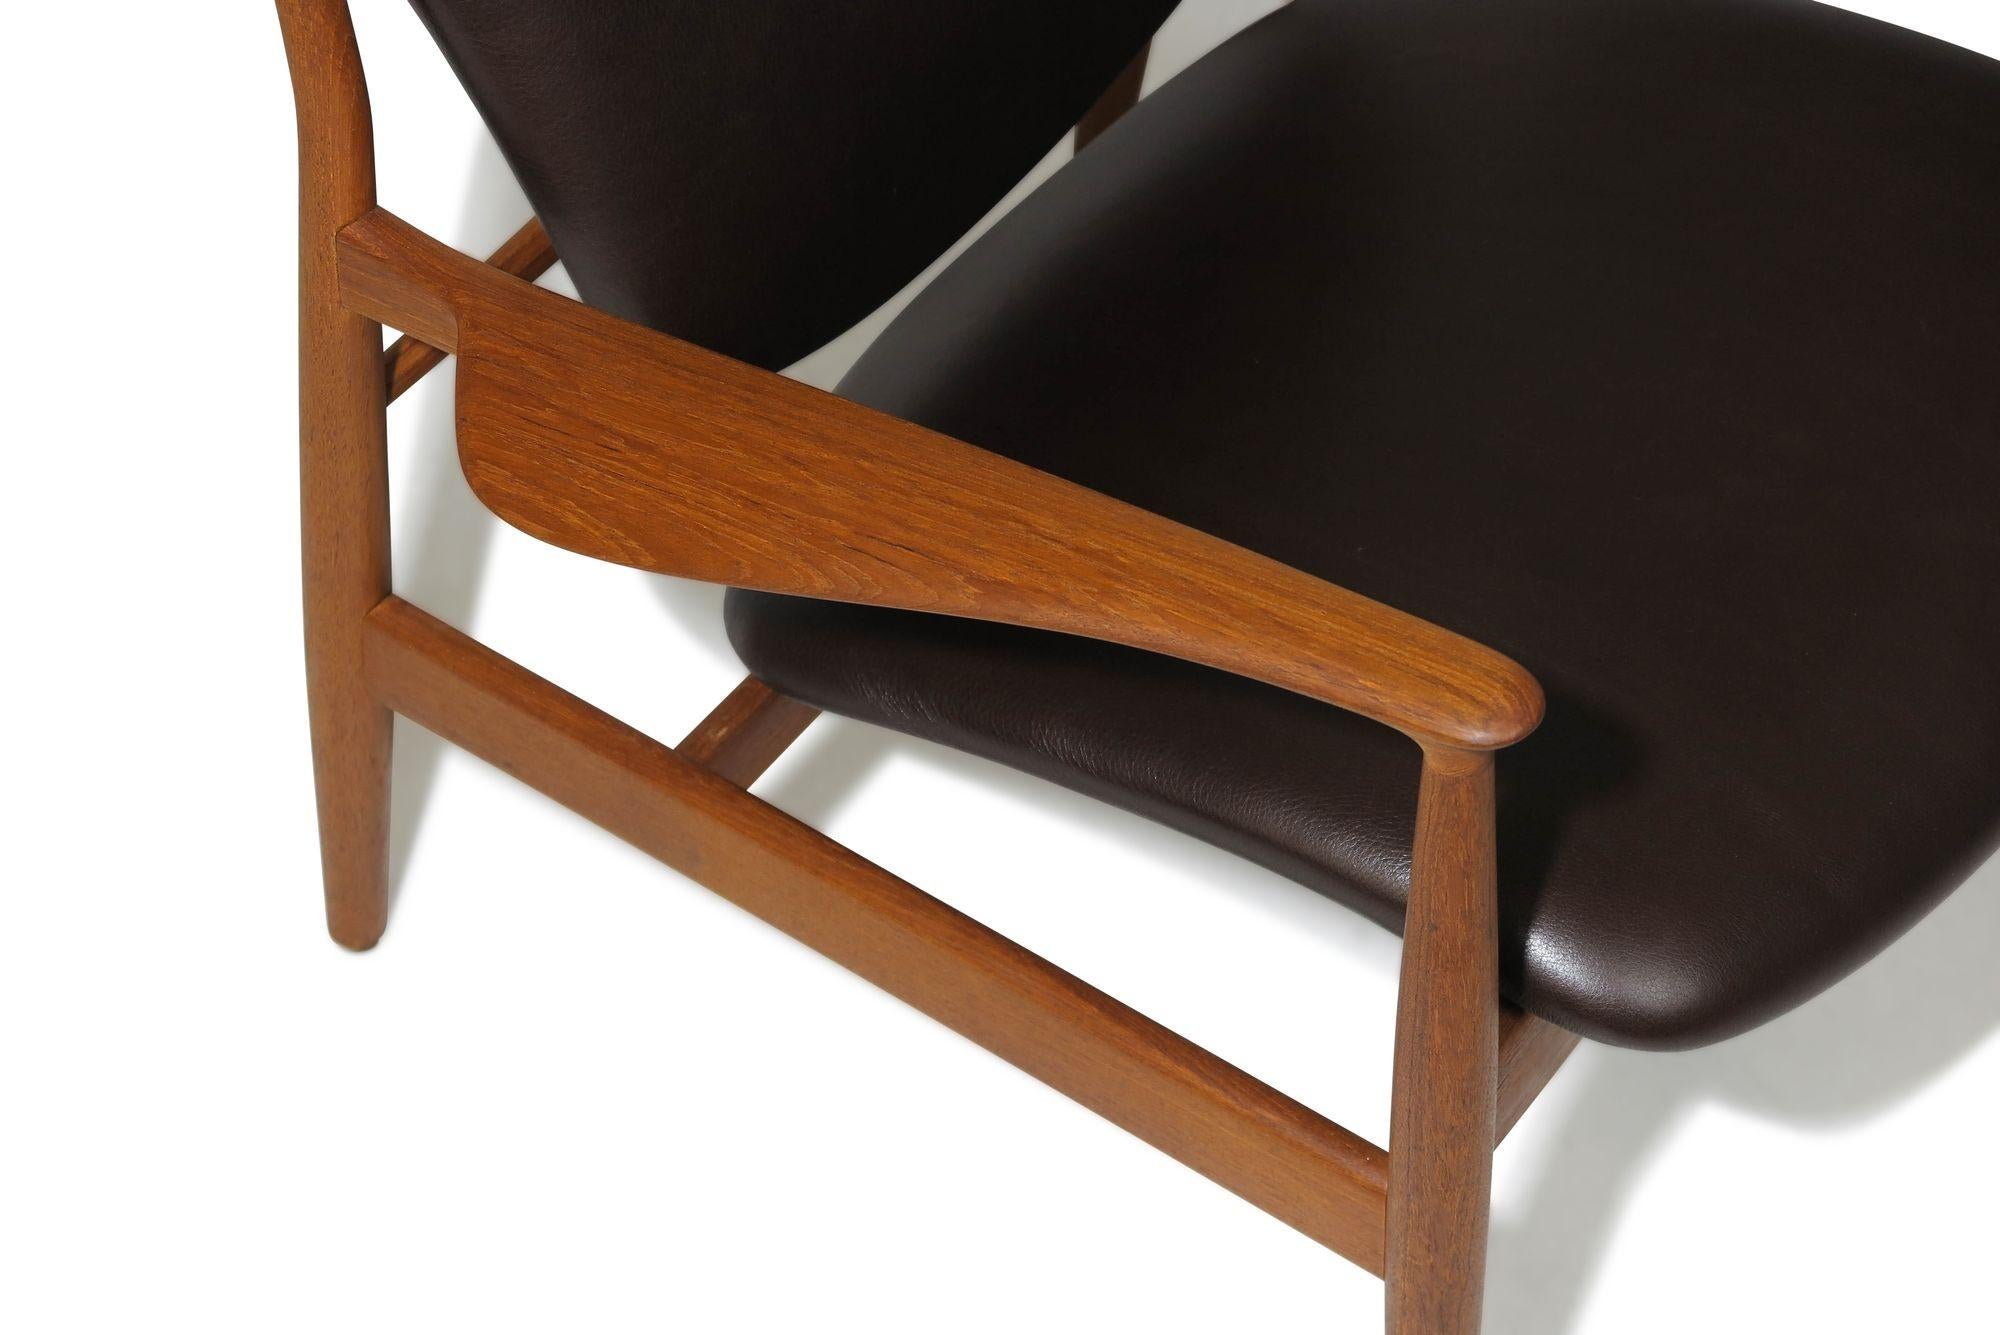 Scandinavian lounge chair designed by Finn Juhl for France & Daverkosen, Denmark. Model FD 136 is skillfully handcrafted from beautiful old-growth teak wood. The chair boasts elegantly carved armrests and a gracefully curved seat and backrest.